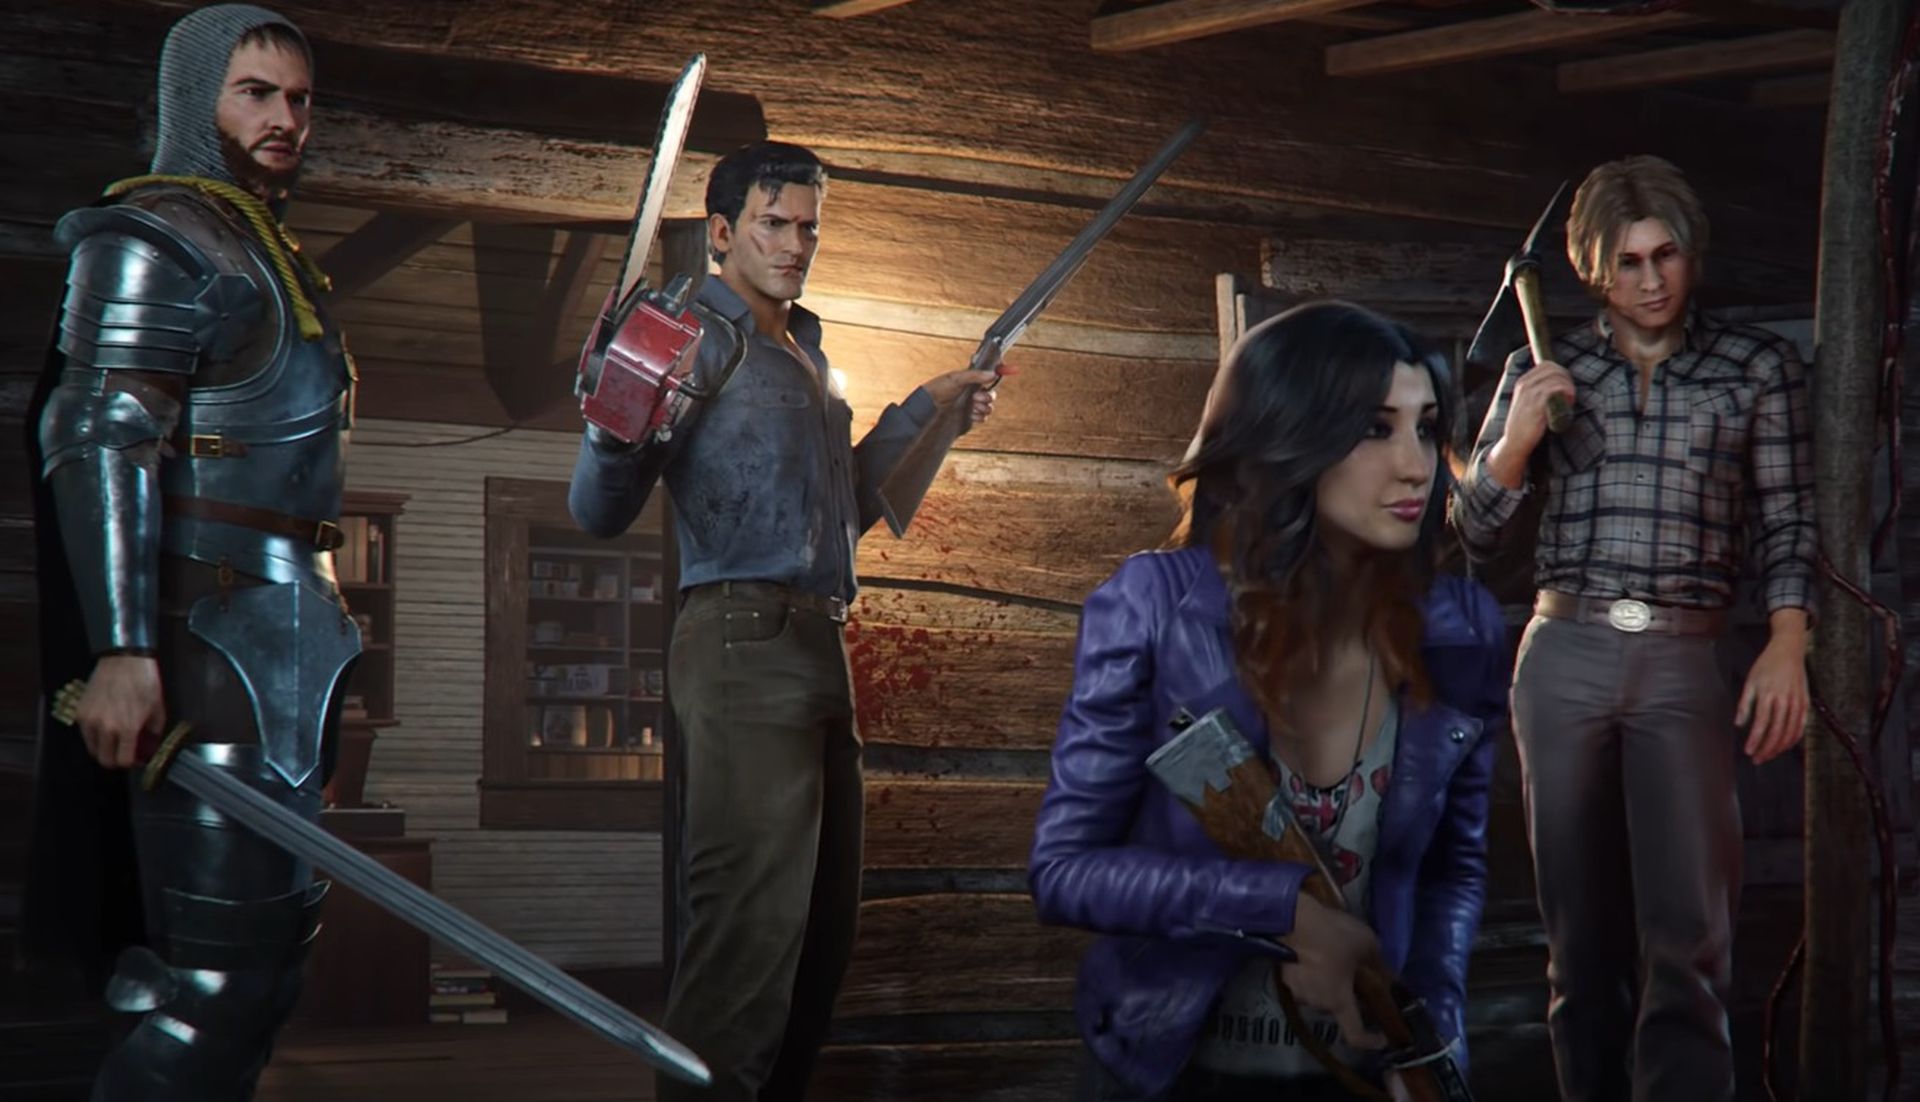 In today's article, we are going to go over Evil Dead The Game system requirements, so you know if your gaming PC is powerful enough to run this new game.